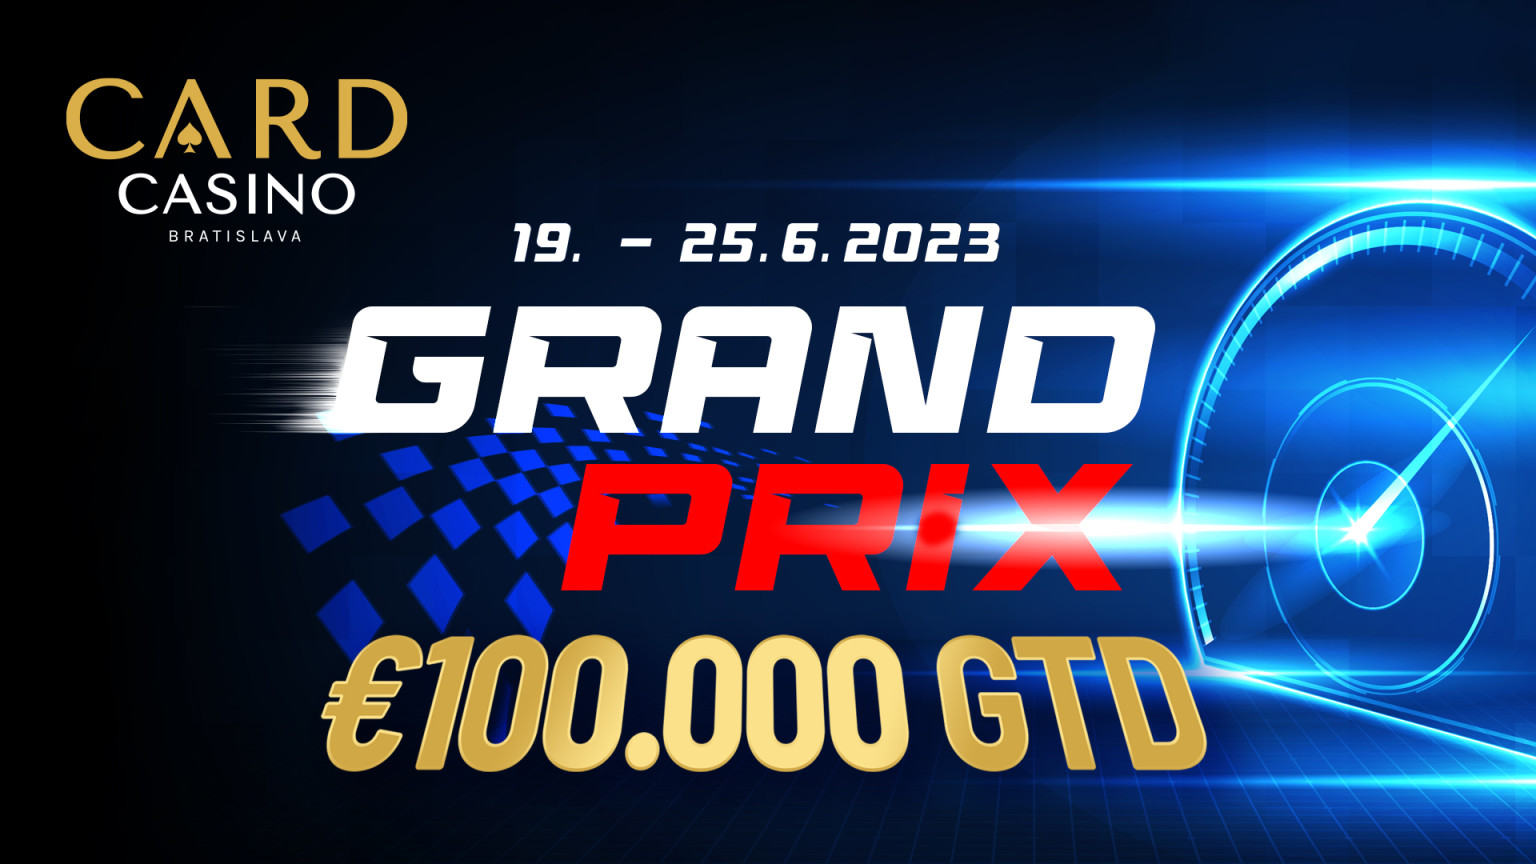 The end of June brings the €100,000 GTD Grand Prix back to Card Casino